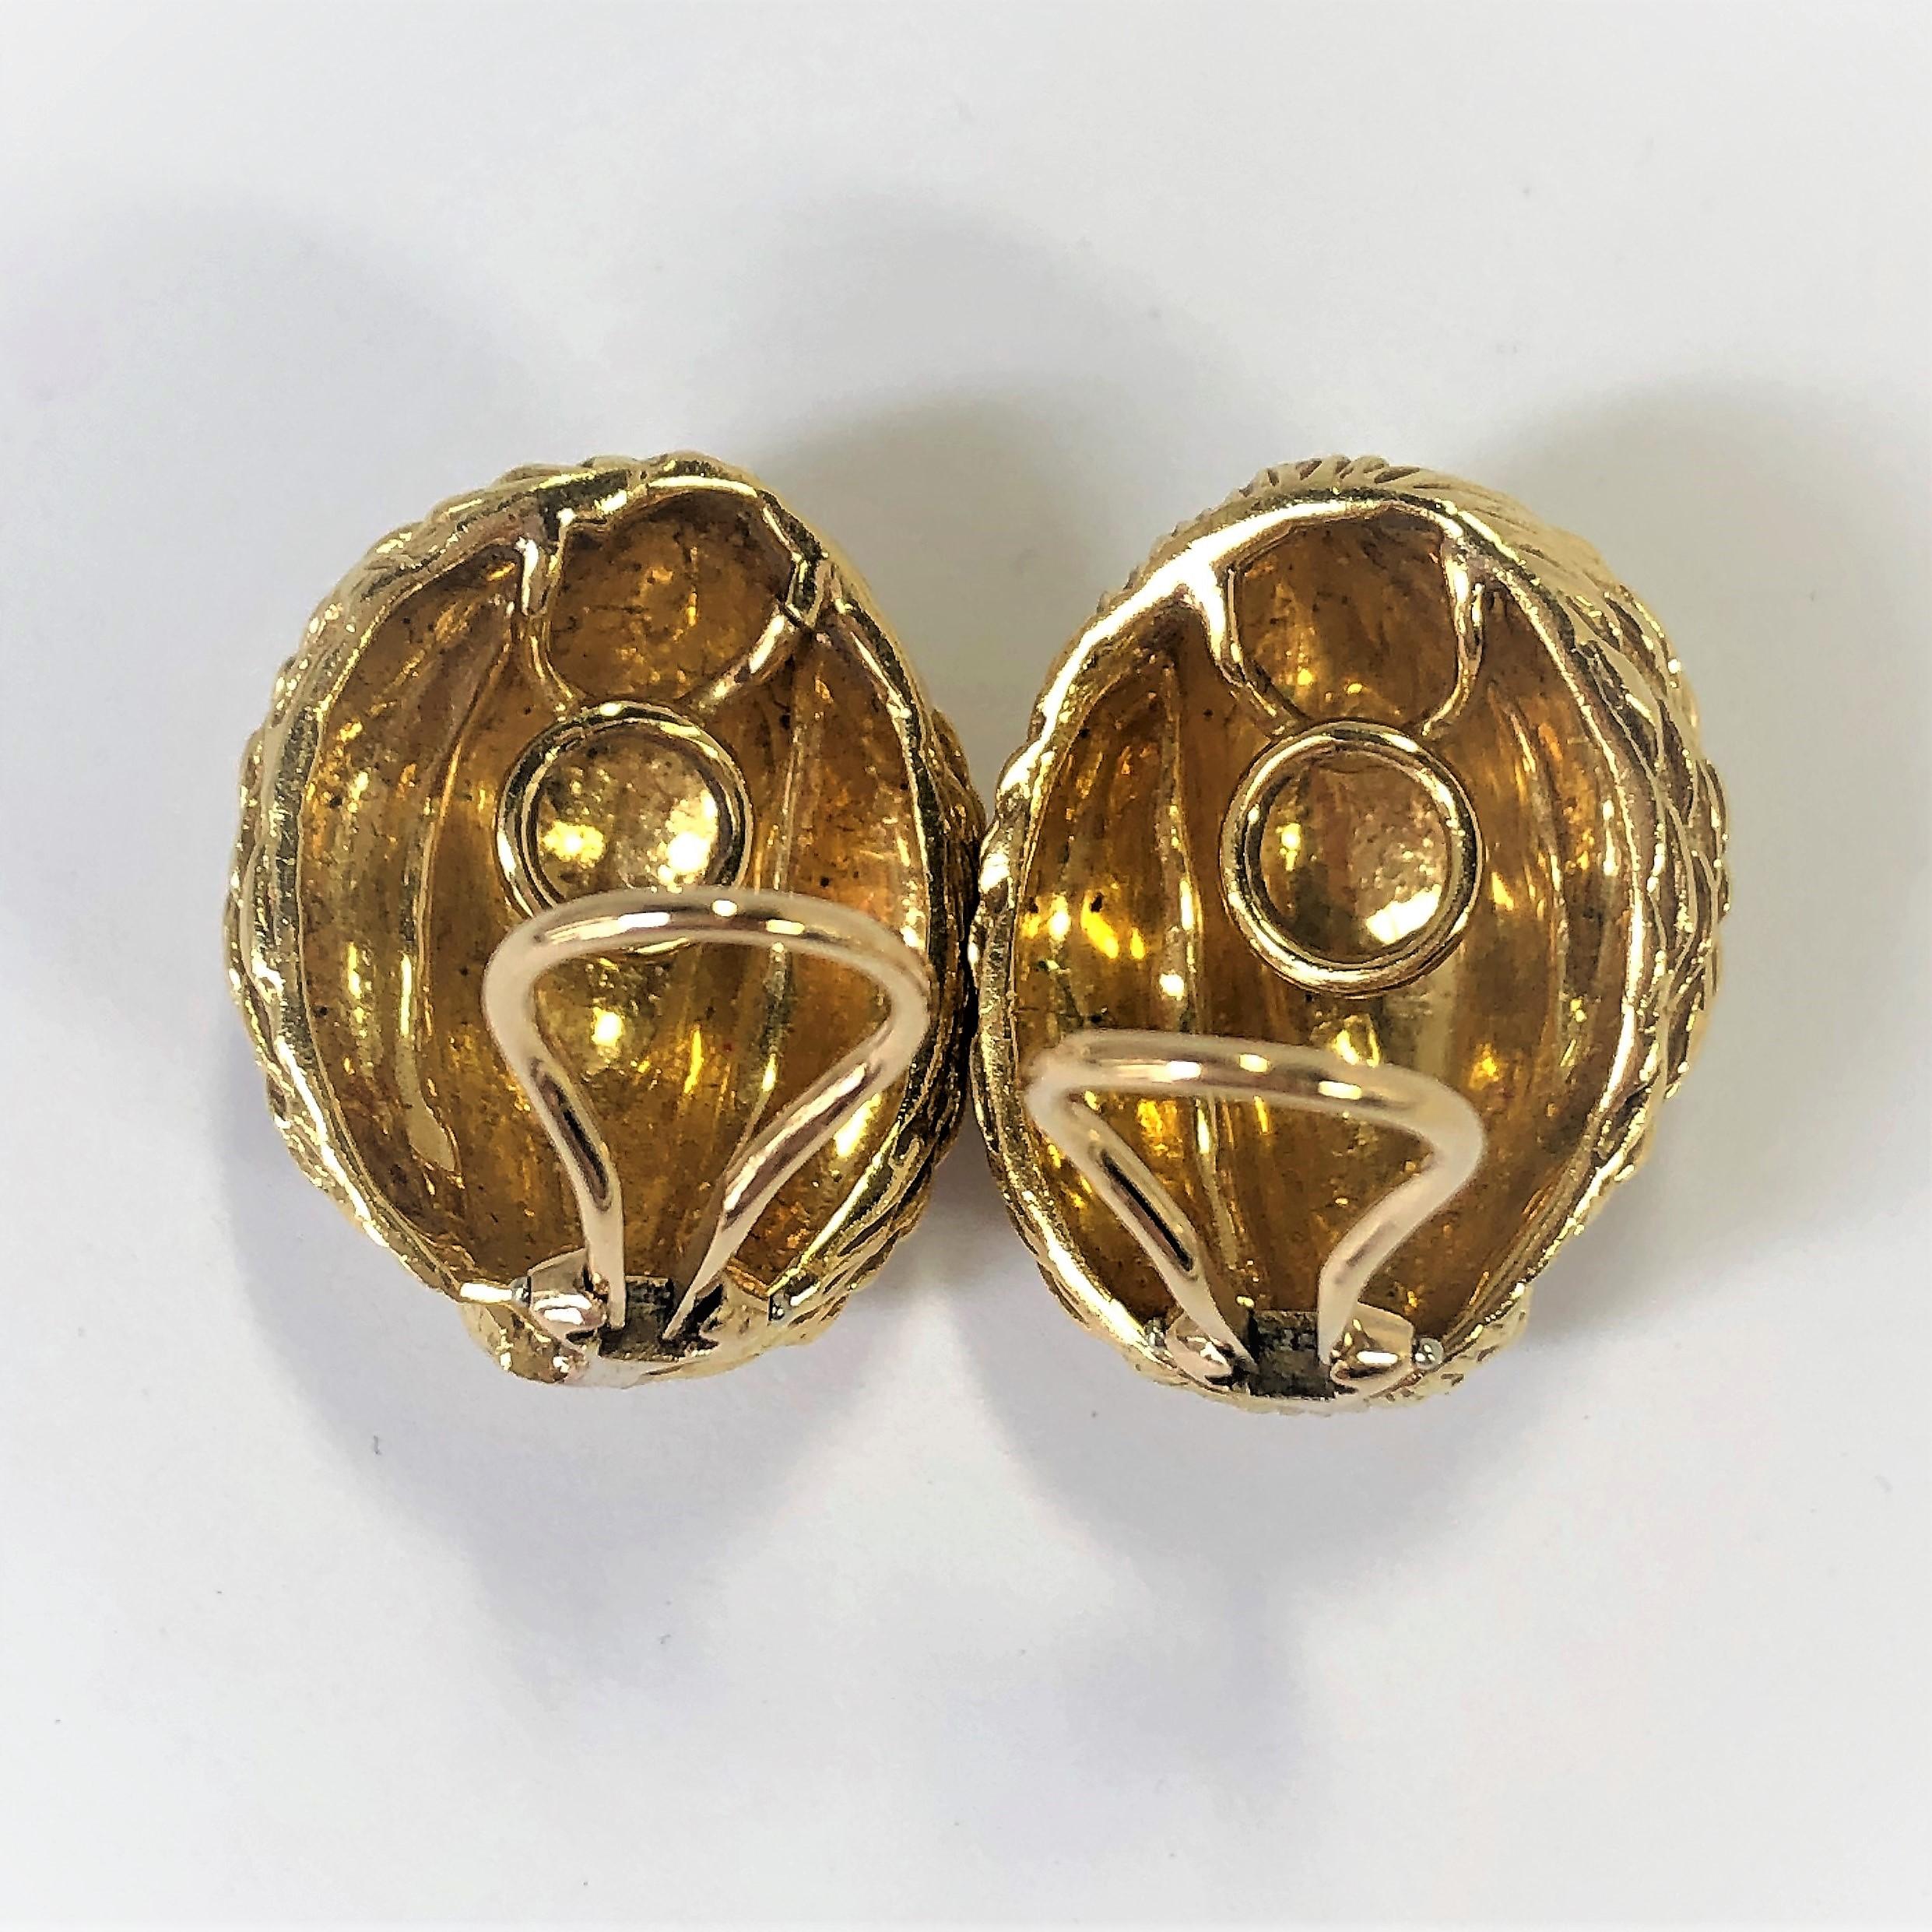 Made of 18K yellow gold, these classic style clip on earrings by Van Cleef and Arpels
would be a welcome addition to any lady's jewelry collection. The look is great for everyday wear, and they are comfortable enough to be worn all day long.